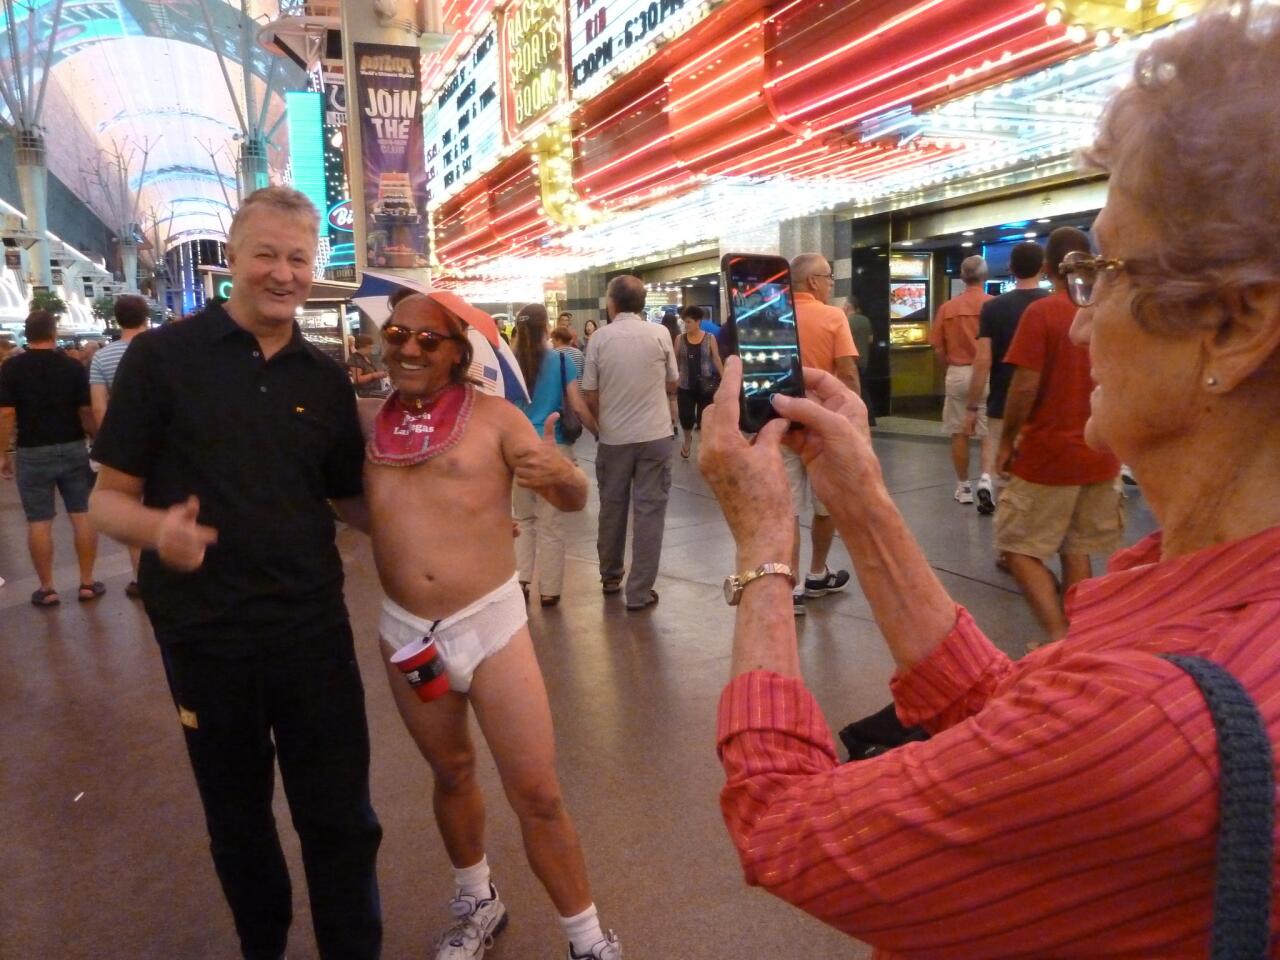 Clarice Berg, 82, takes a picture of Lost Baby with her son, Jim, on Fremont Street in Las Vegas. The self-proclaimed Lost Baby of Las Vegas relies on the kindness of strangers.